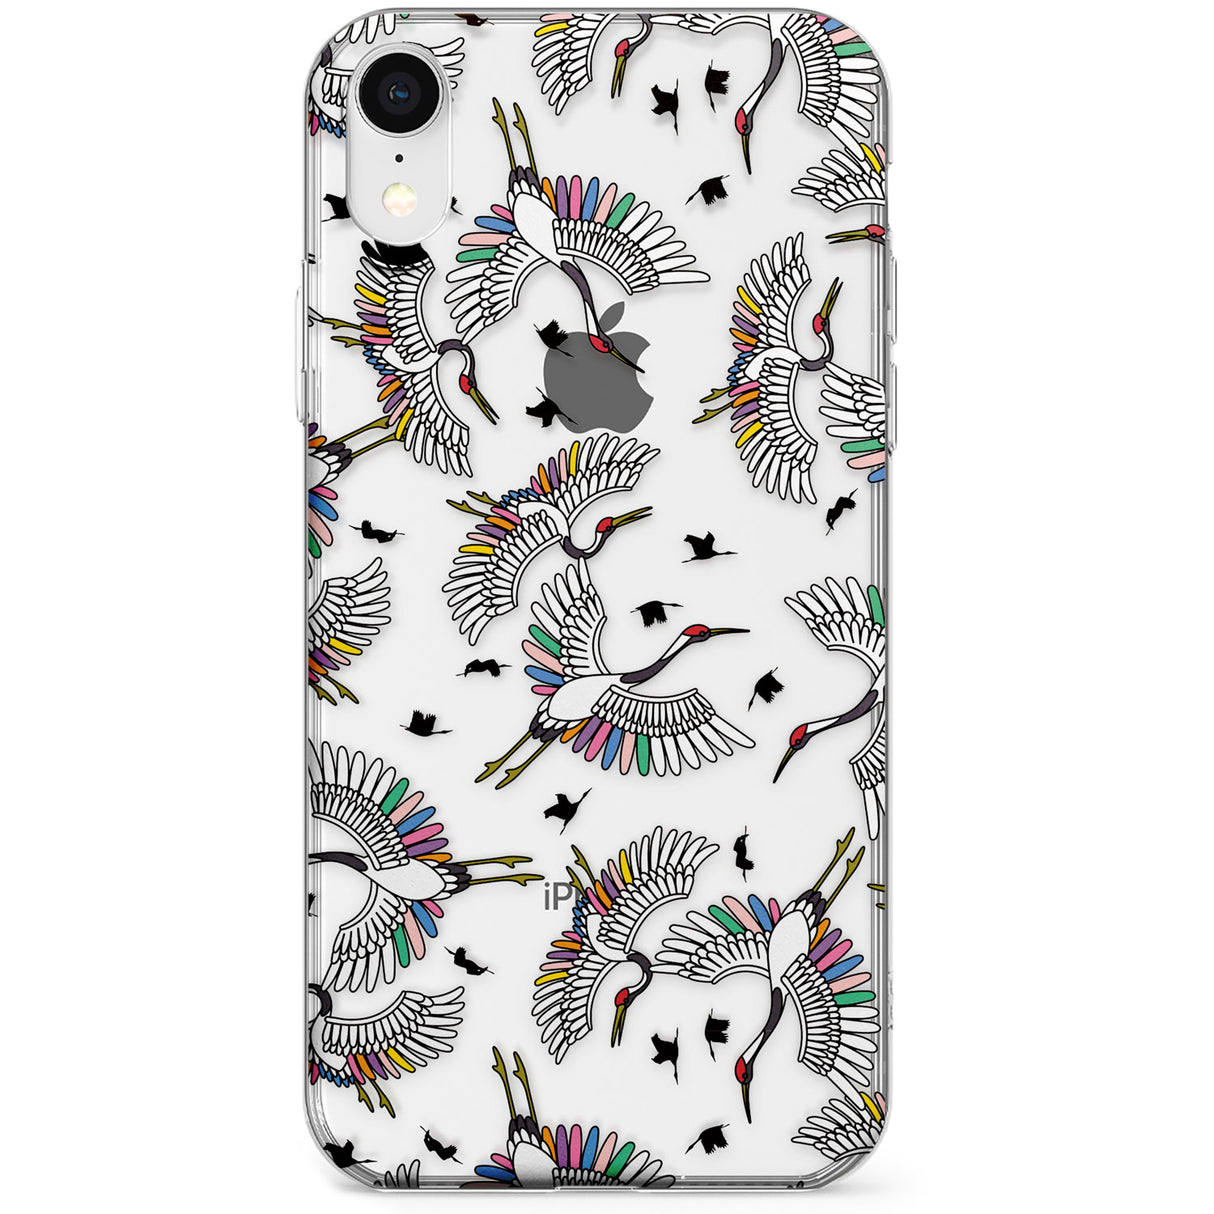 Colourful Crane Pattern Phone Case for iPhone X, XS Max, XR